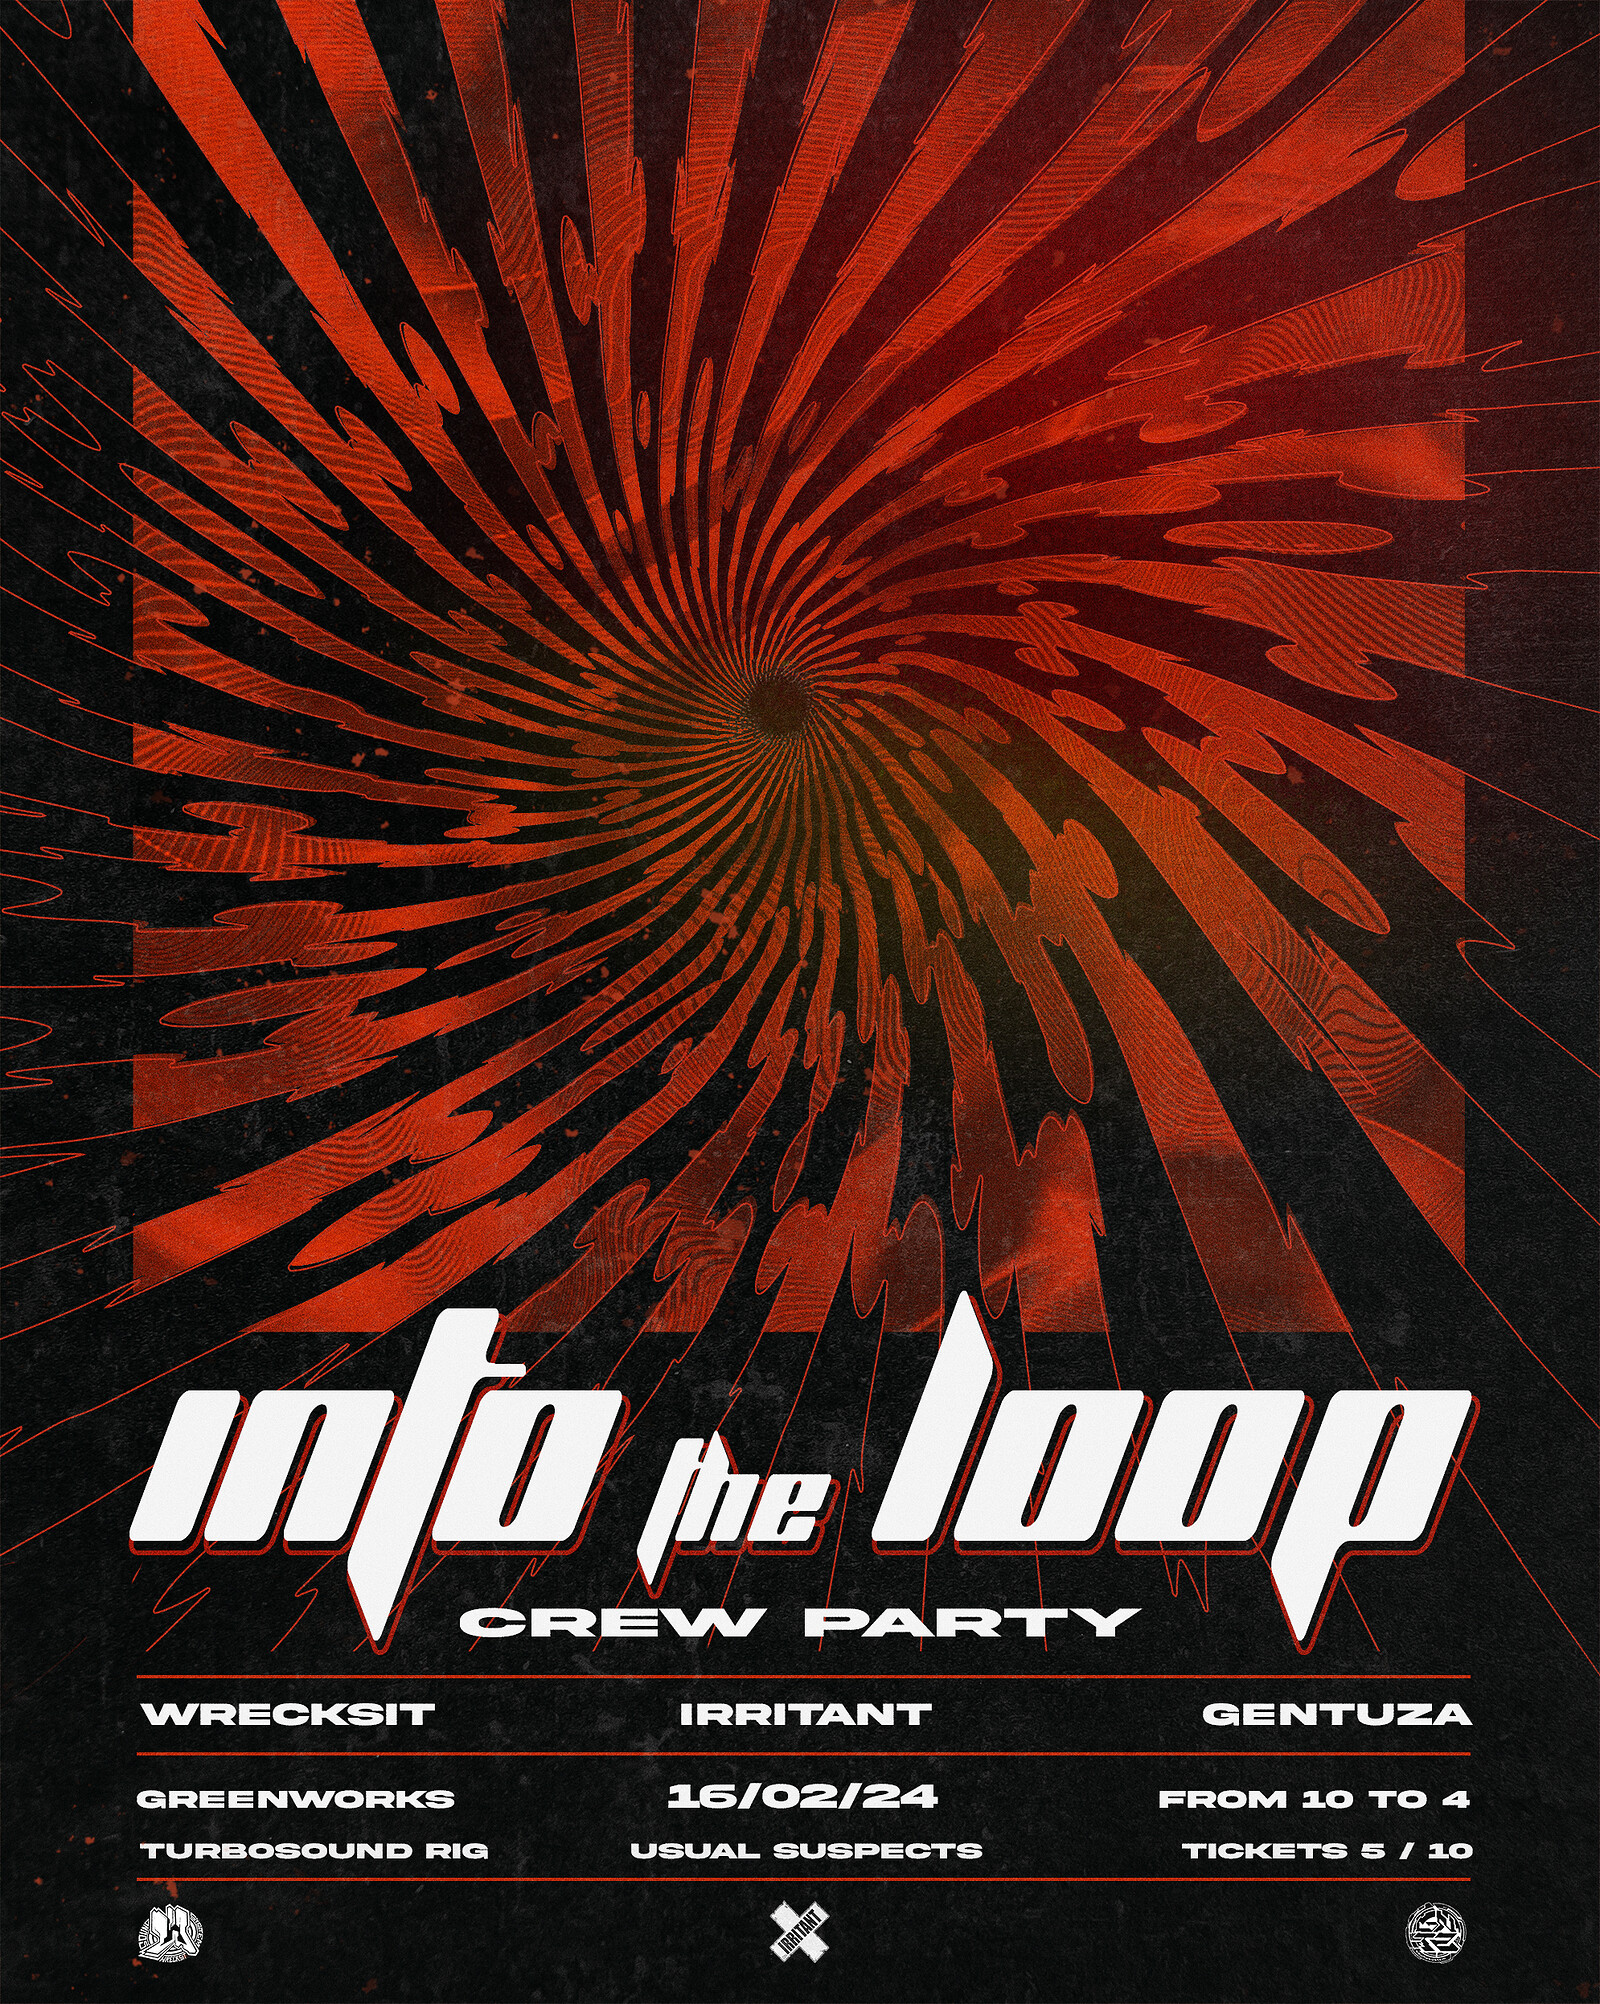 Into the Loop: CREW PARTY at Green Works